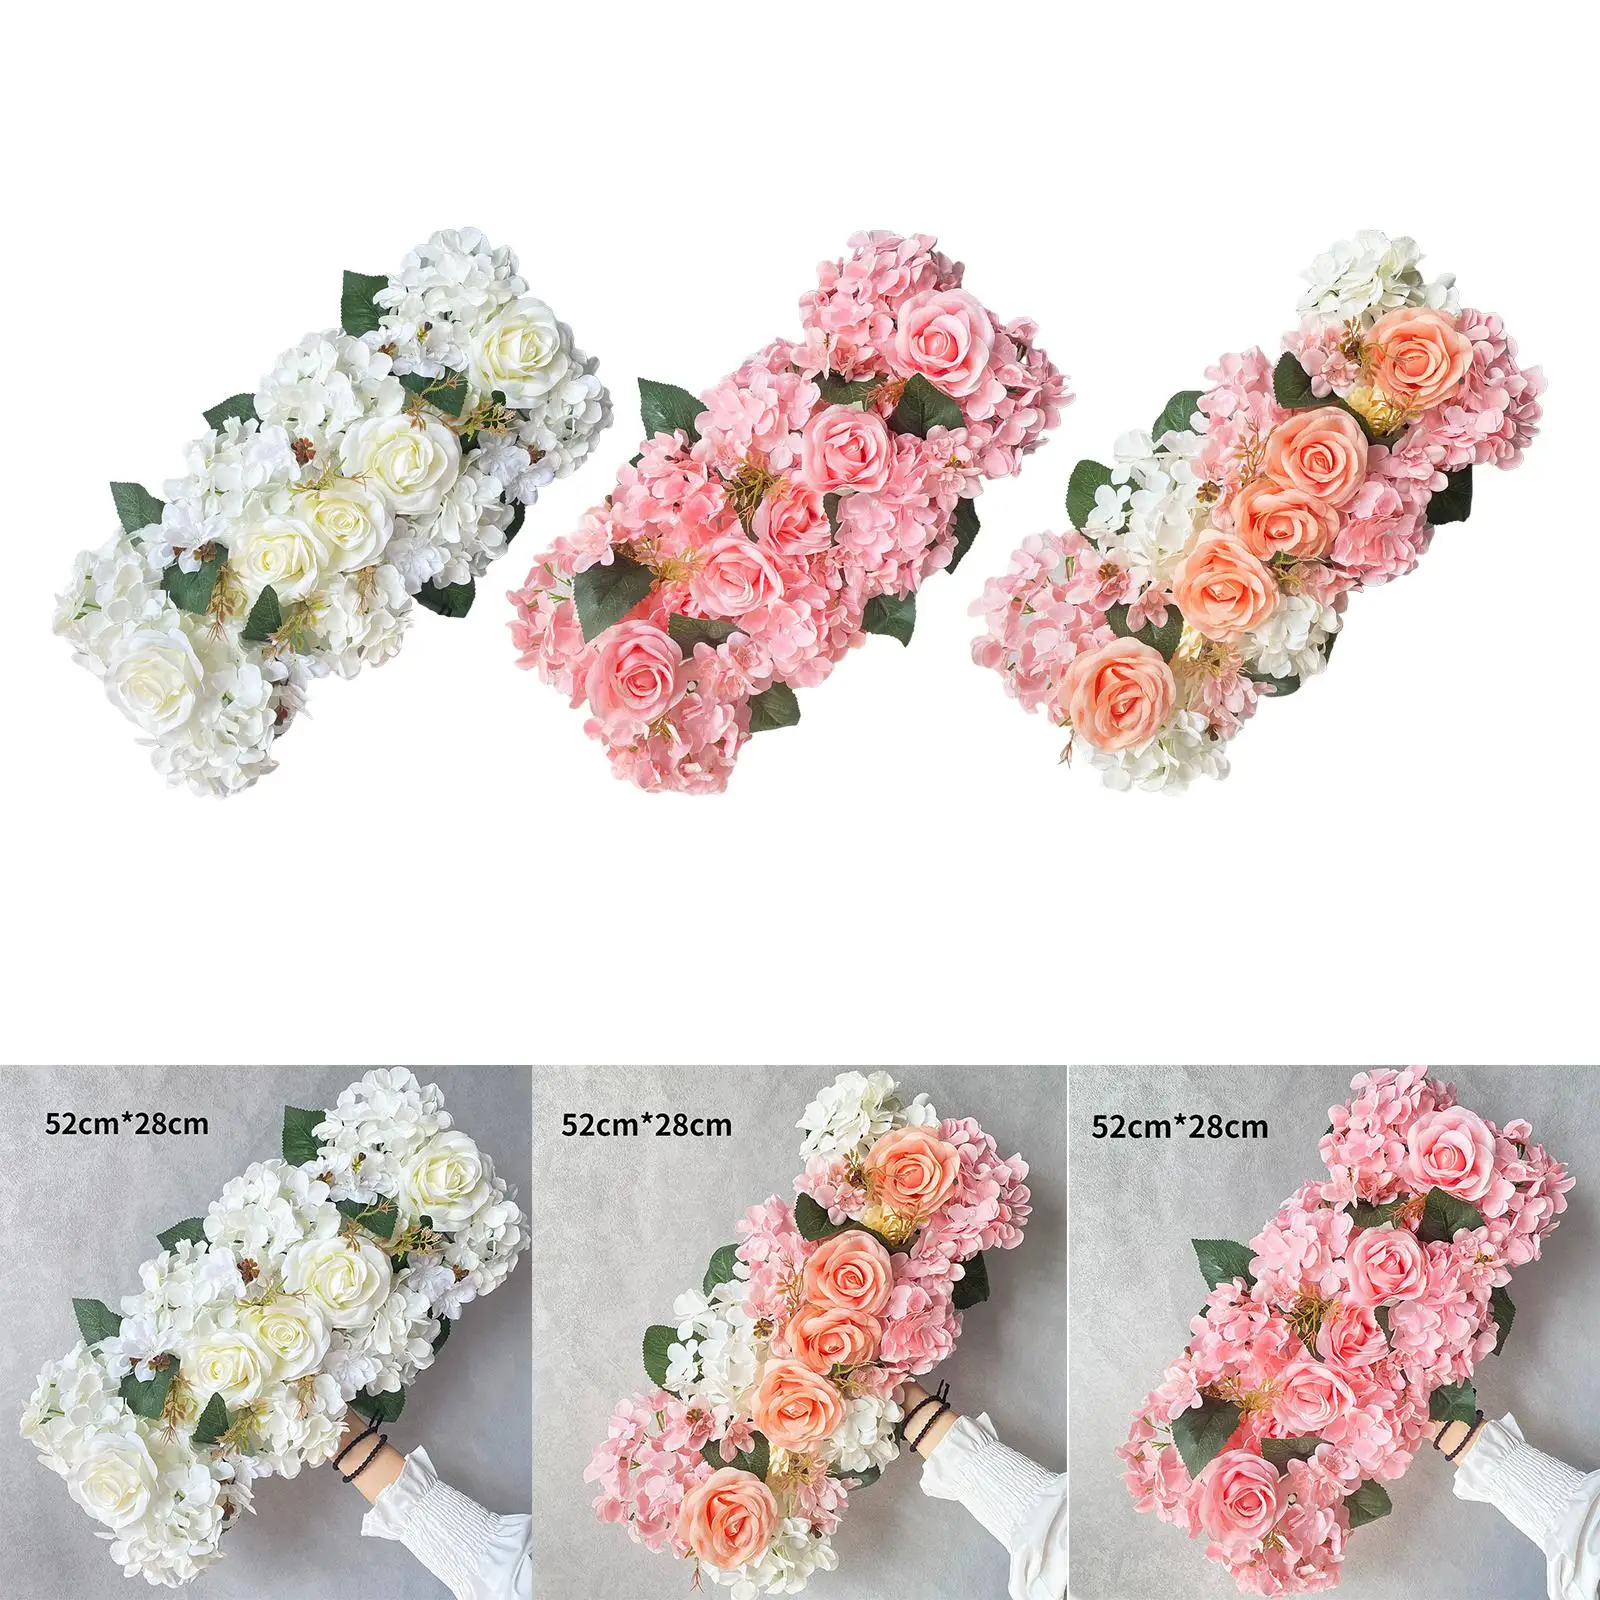 Decorative Flower Panel for Flower Wall, Artificial Flowers for Wall Decor,